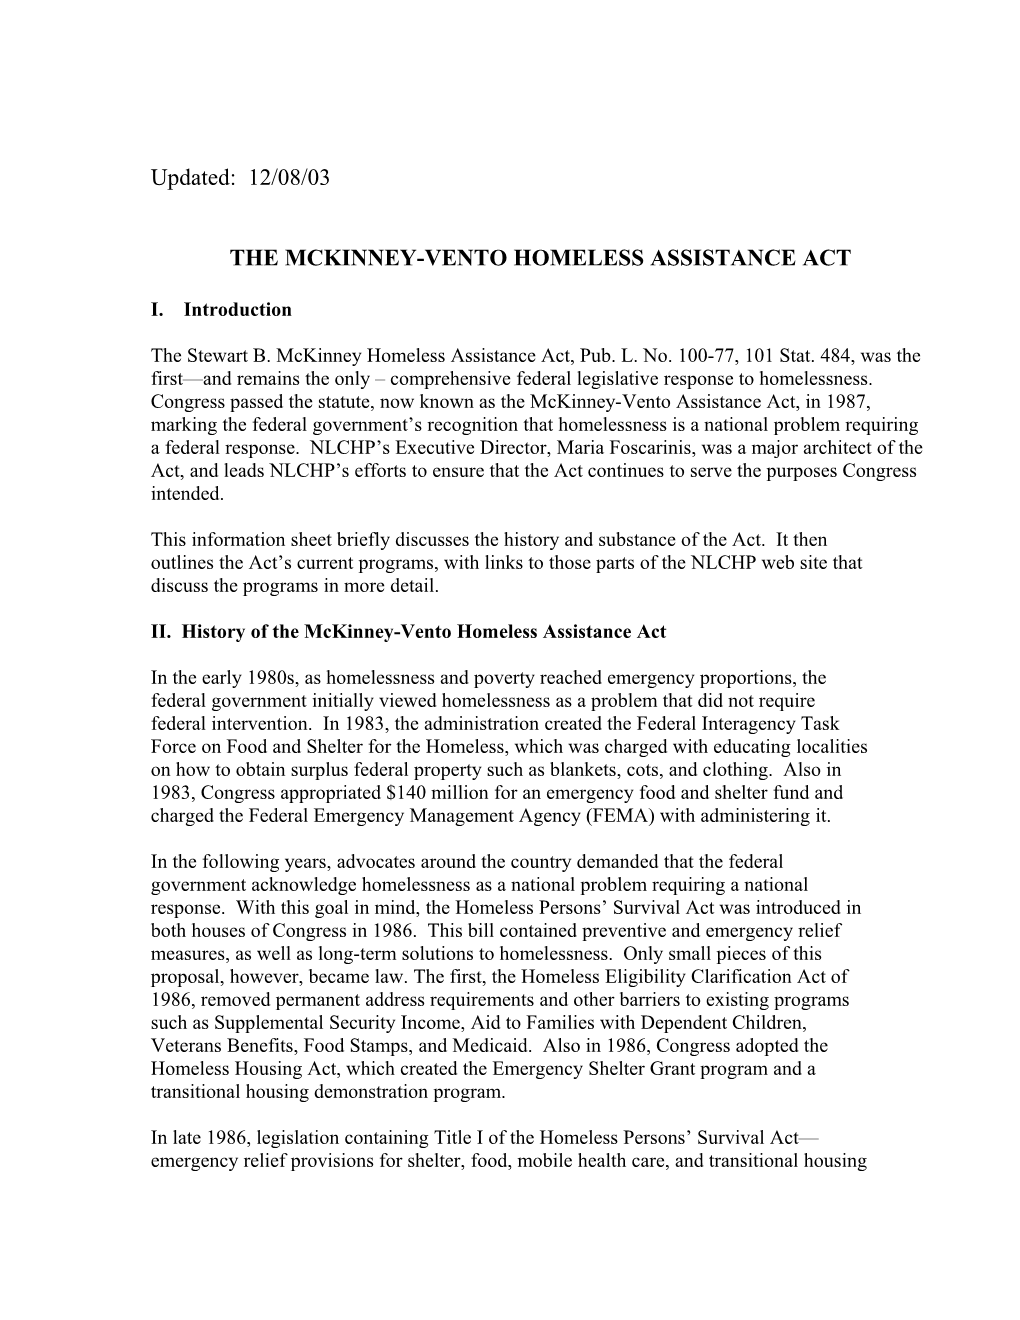 The Mckinney-Vento Homeless Assistance Act